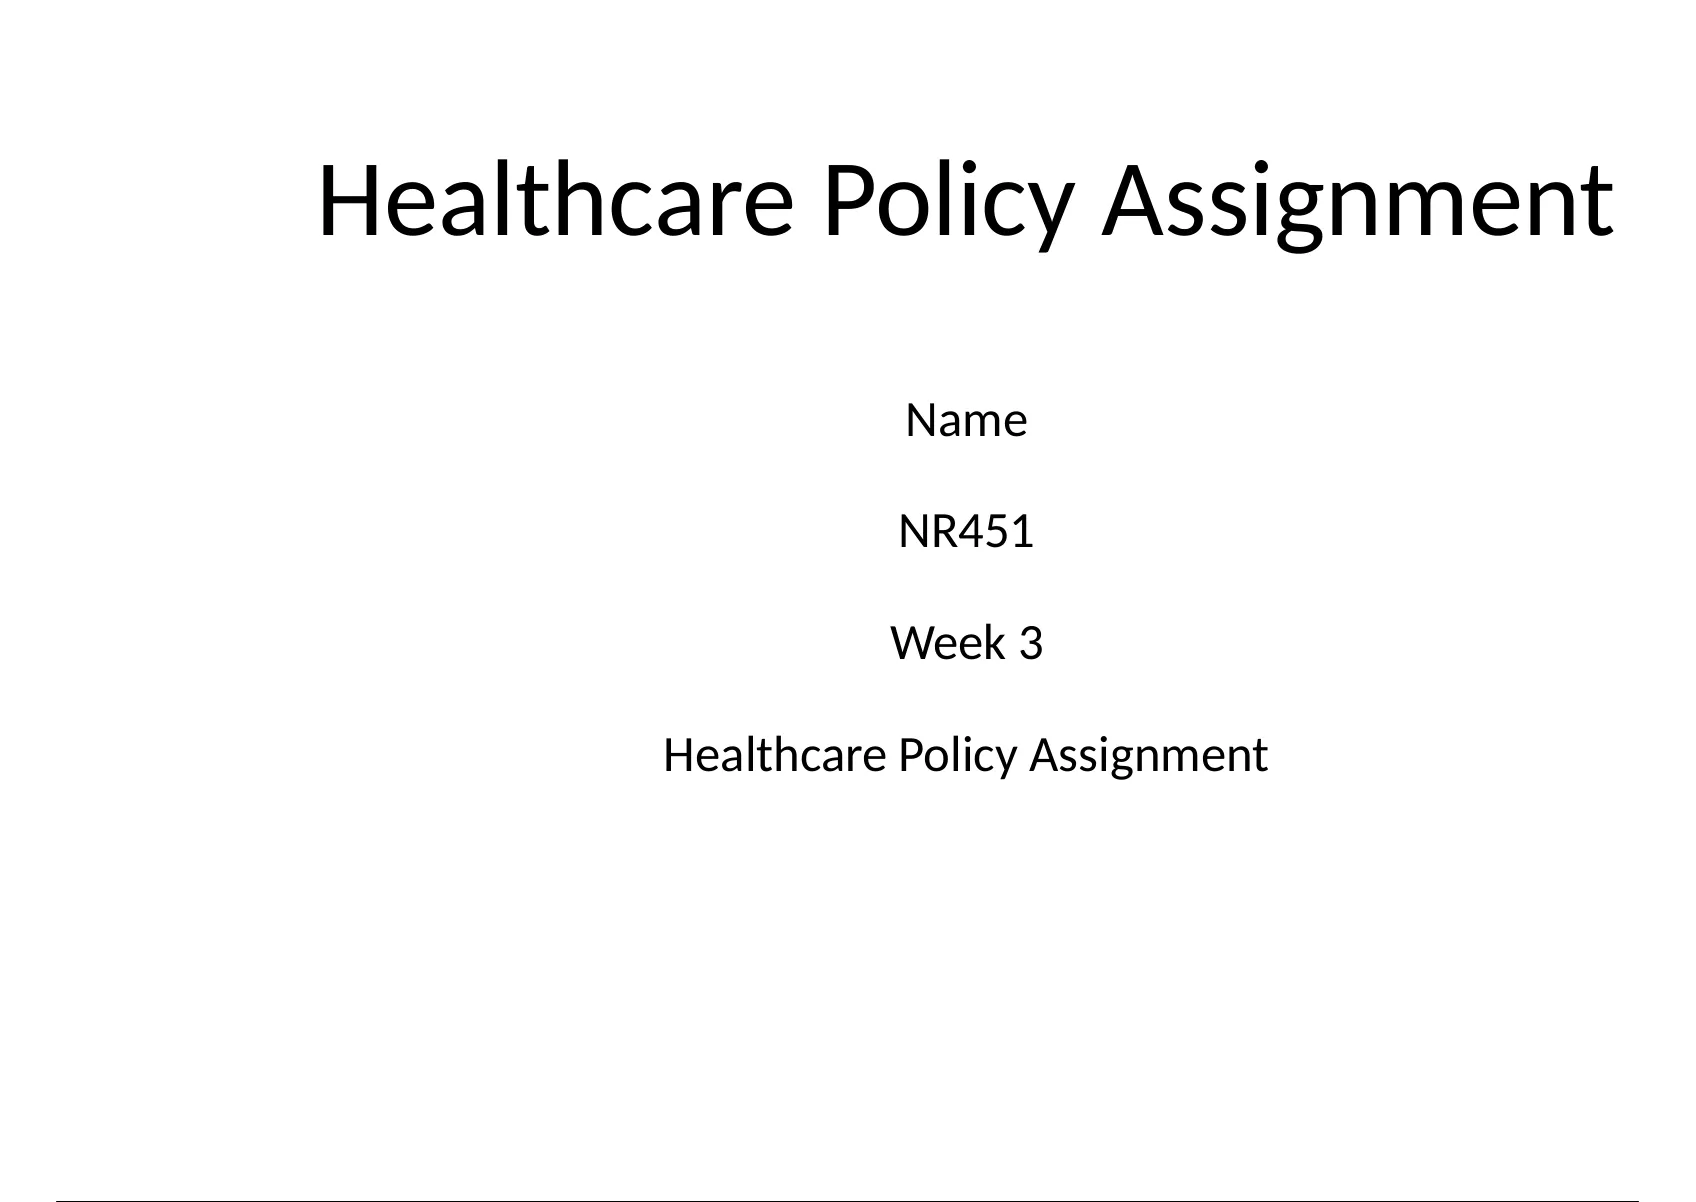 week 3 assignment healthcare policy (graded)